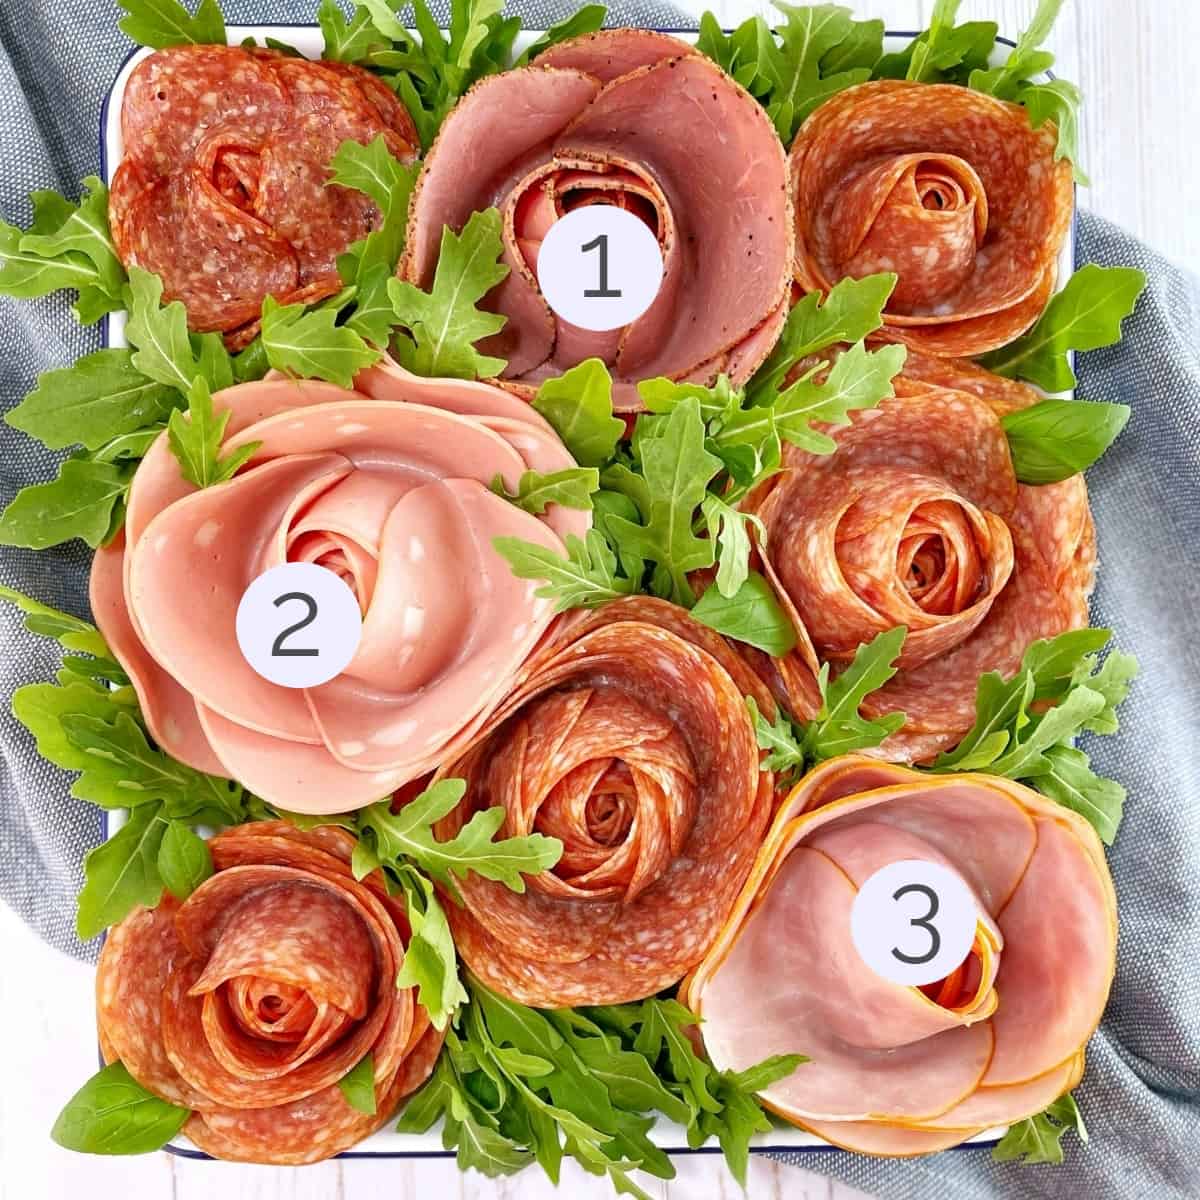 Numbered examples of meat roses made of pepperoni and other deli meats on a white tray with arugula.